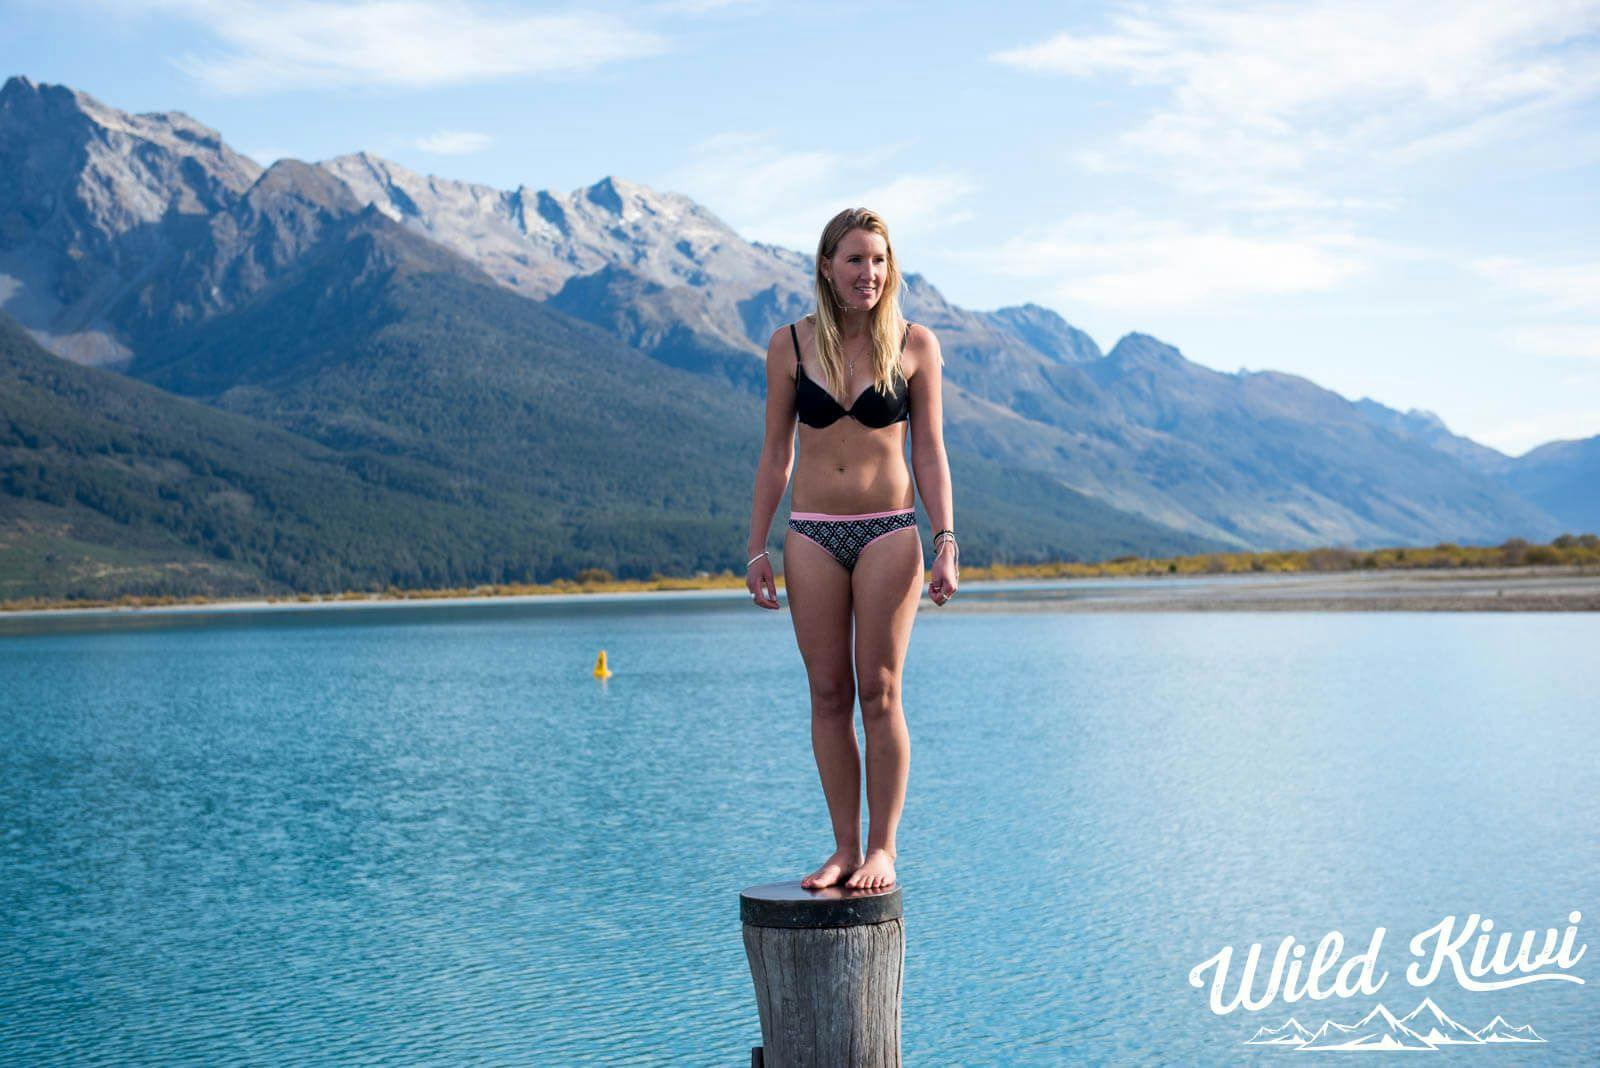 Book a solo trip to New Zealand - Travel alone and empower yourself